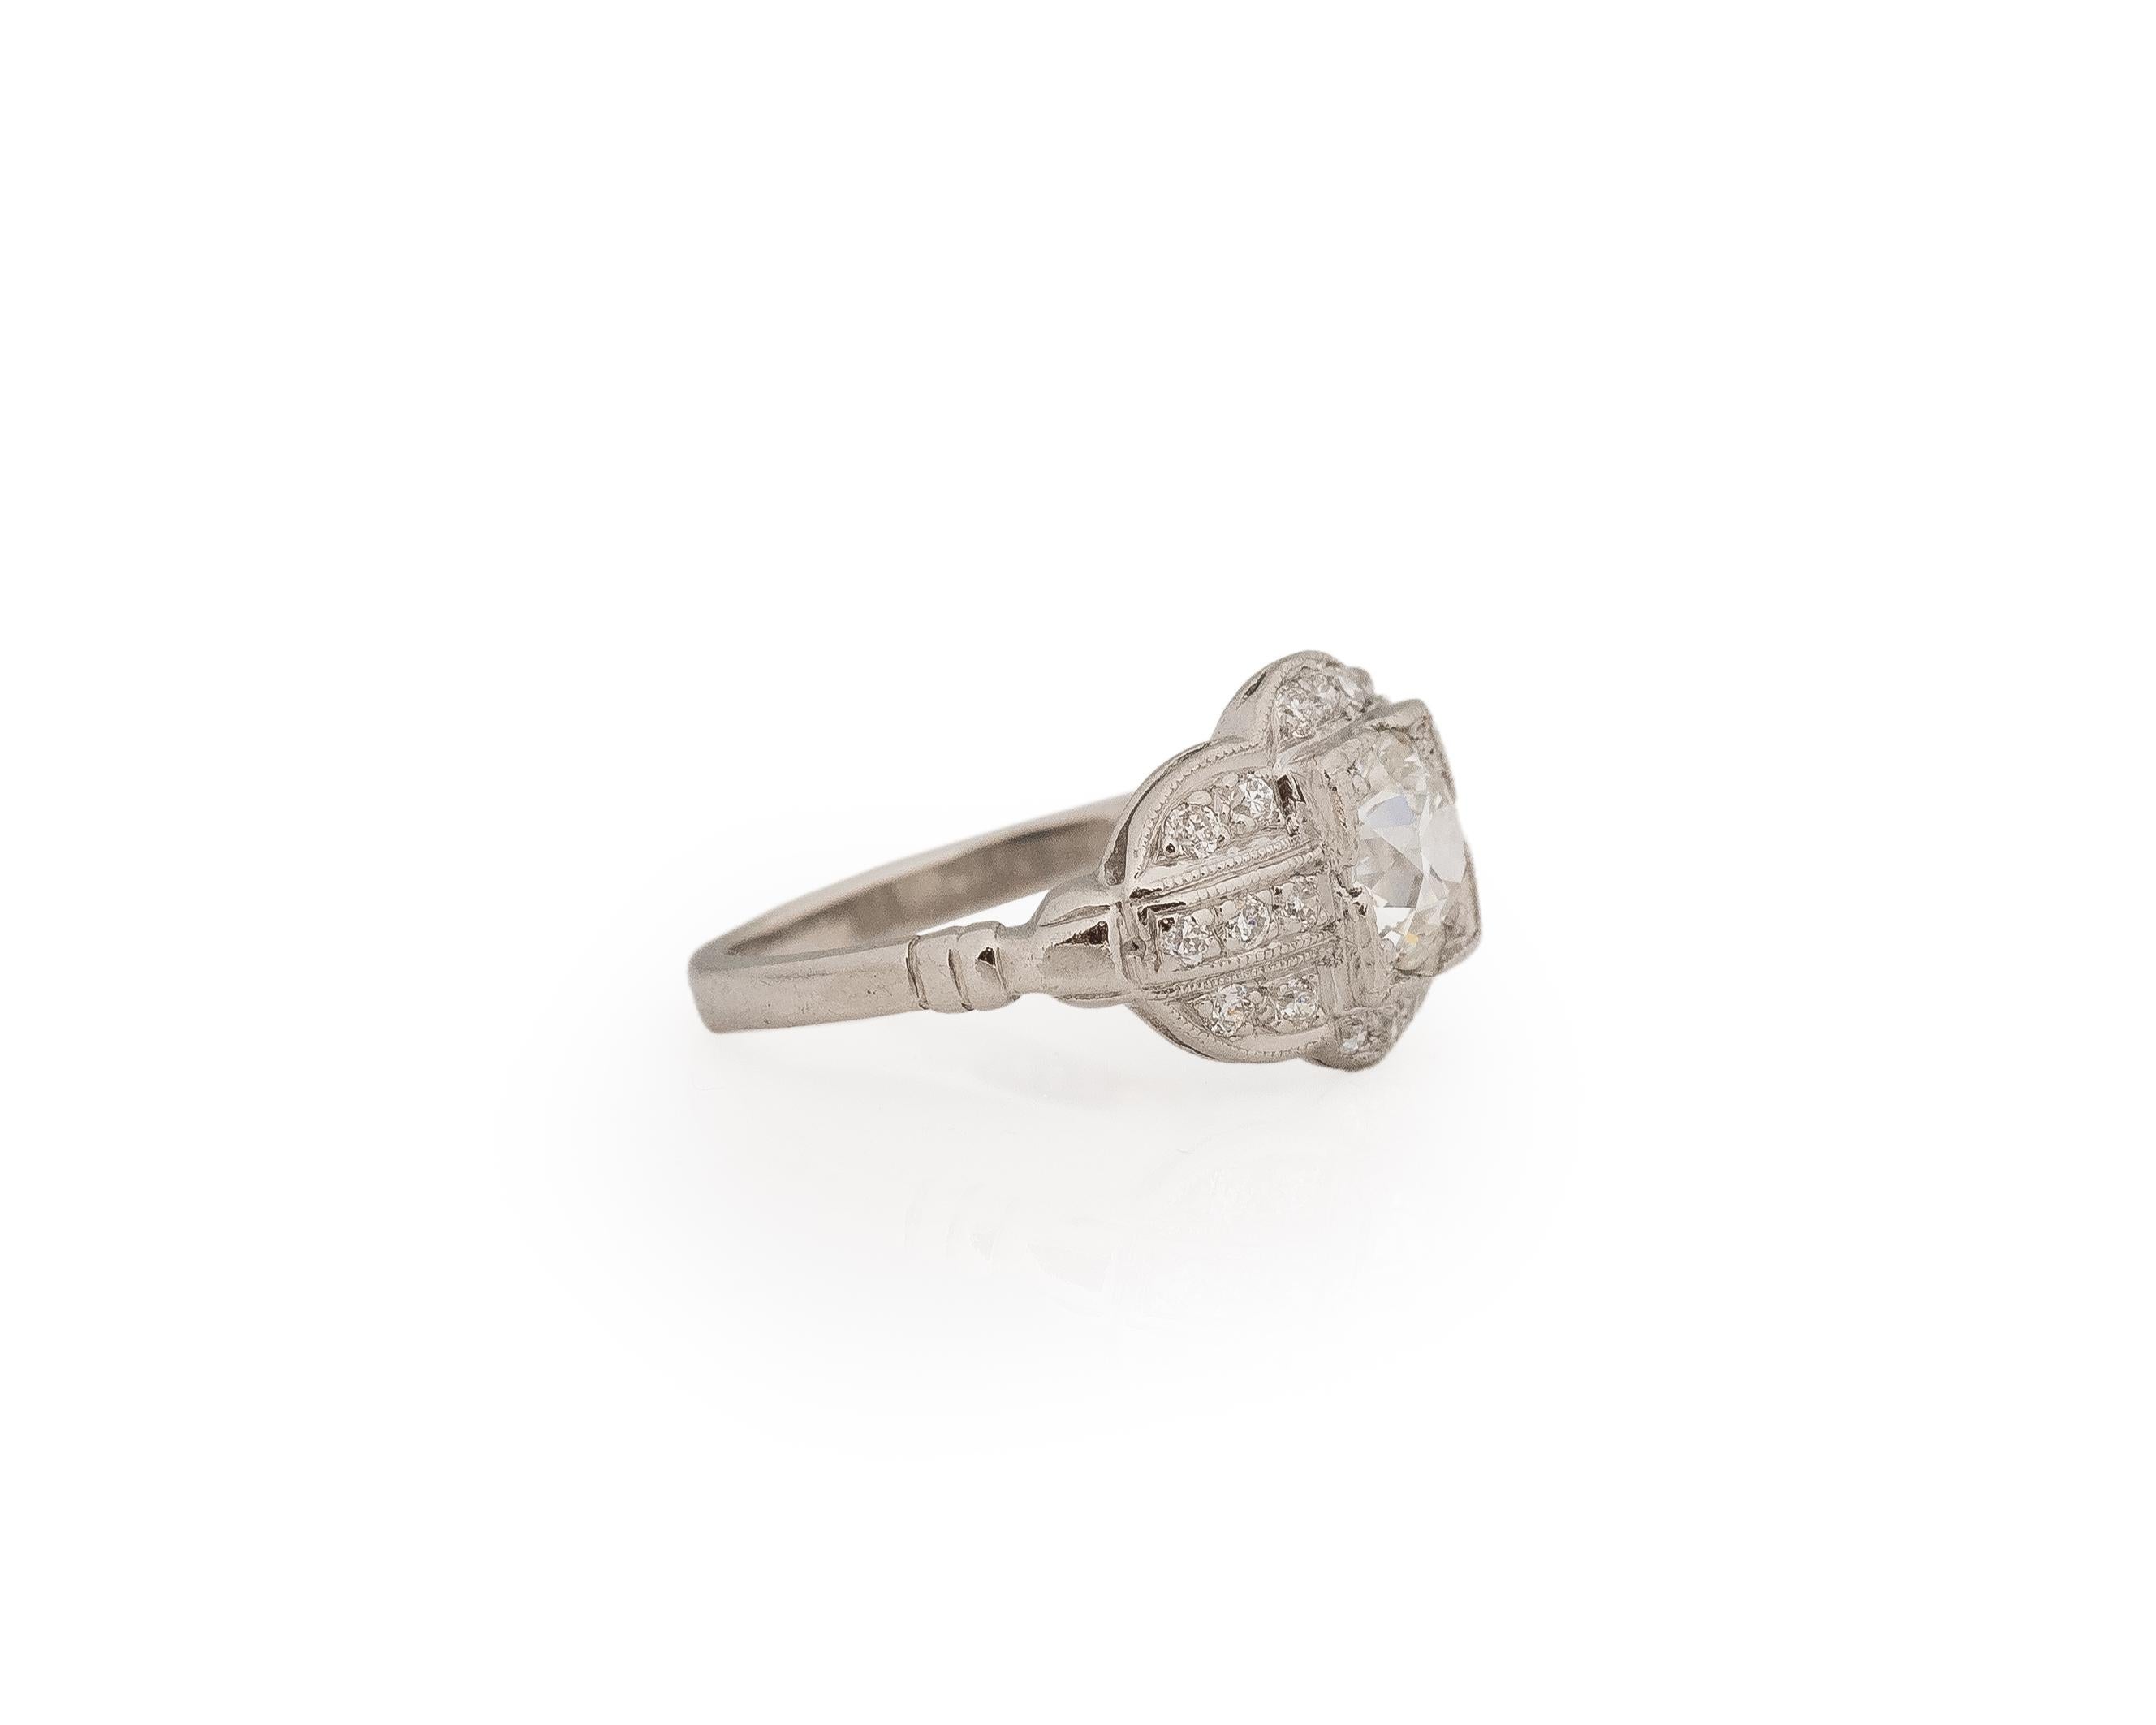 Year:

Item Details:
Ring Size: 5.75
Metal Type: Platinum [Hallmarked, and Tested]
Weight: 4.7 grams

Diamond Details:

GIA Report#:2239085546
Weight: .92ct total weight
Cut: Old European brilliant
Color: G
Clarity: I1
Type: Natural

Finger to Top